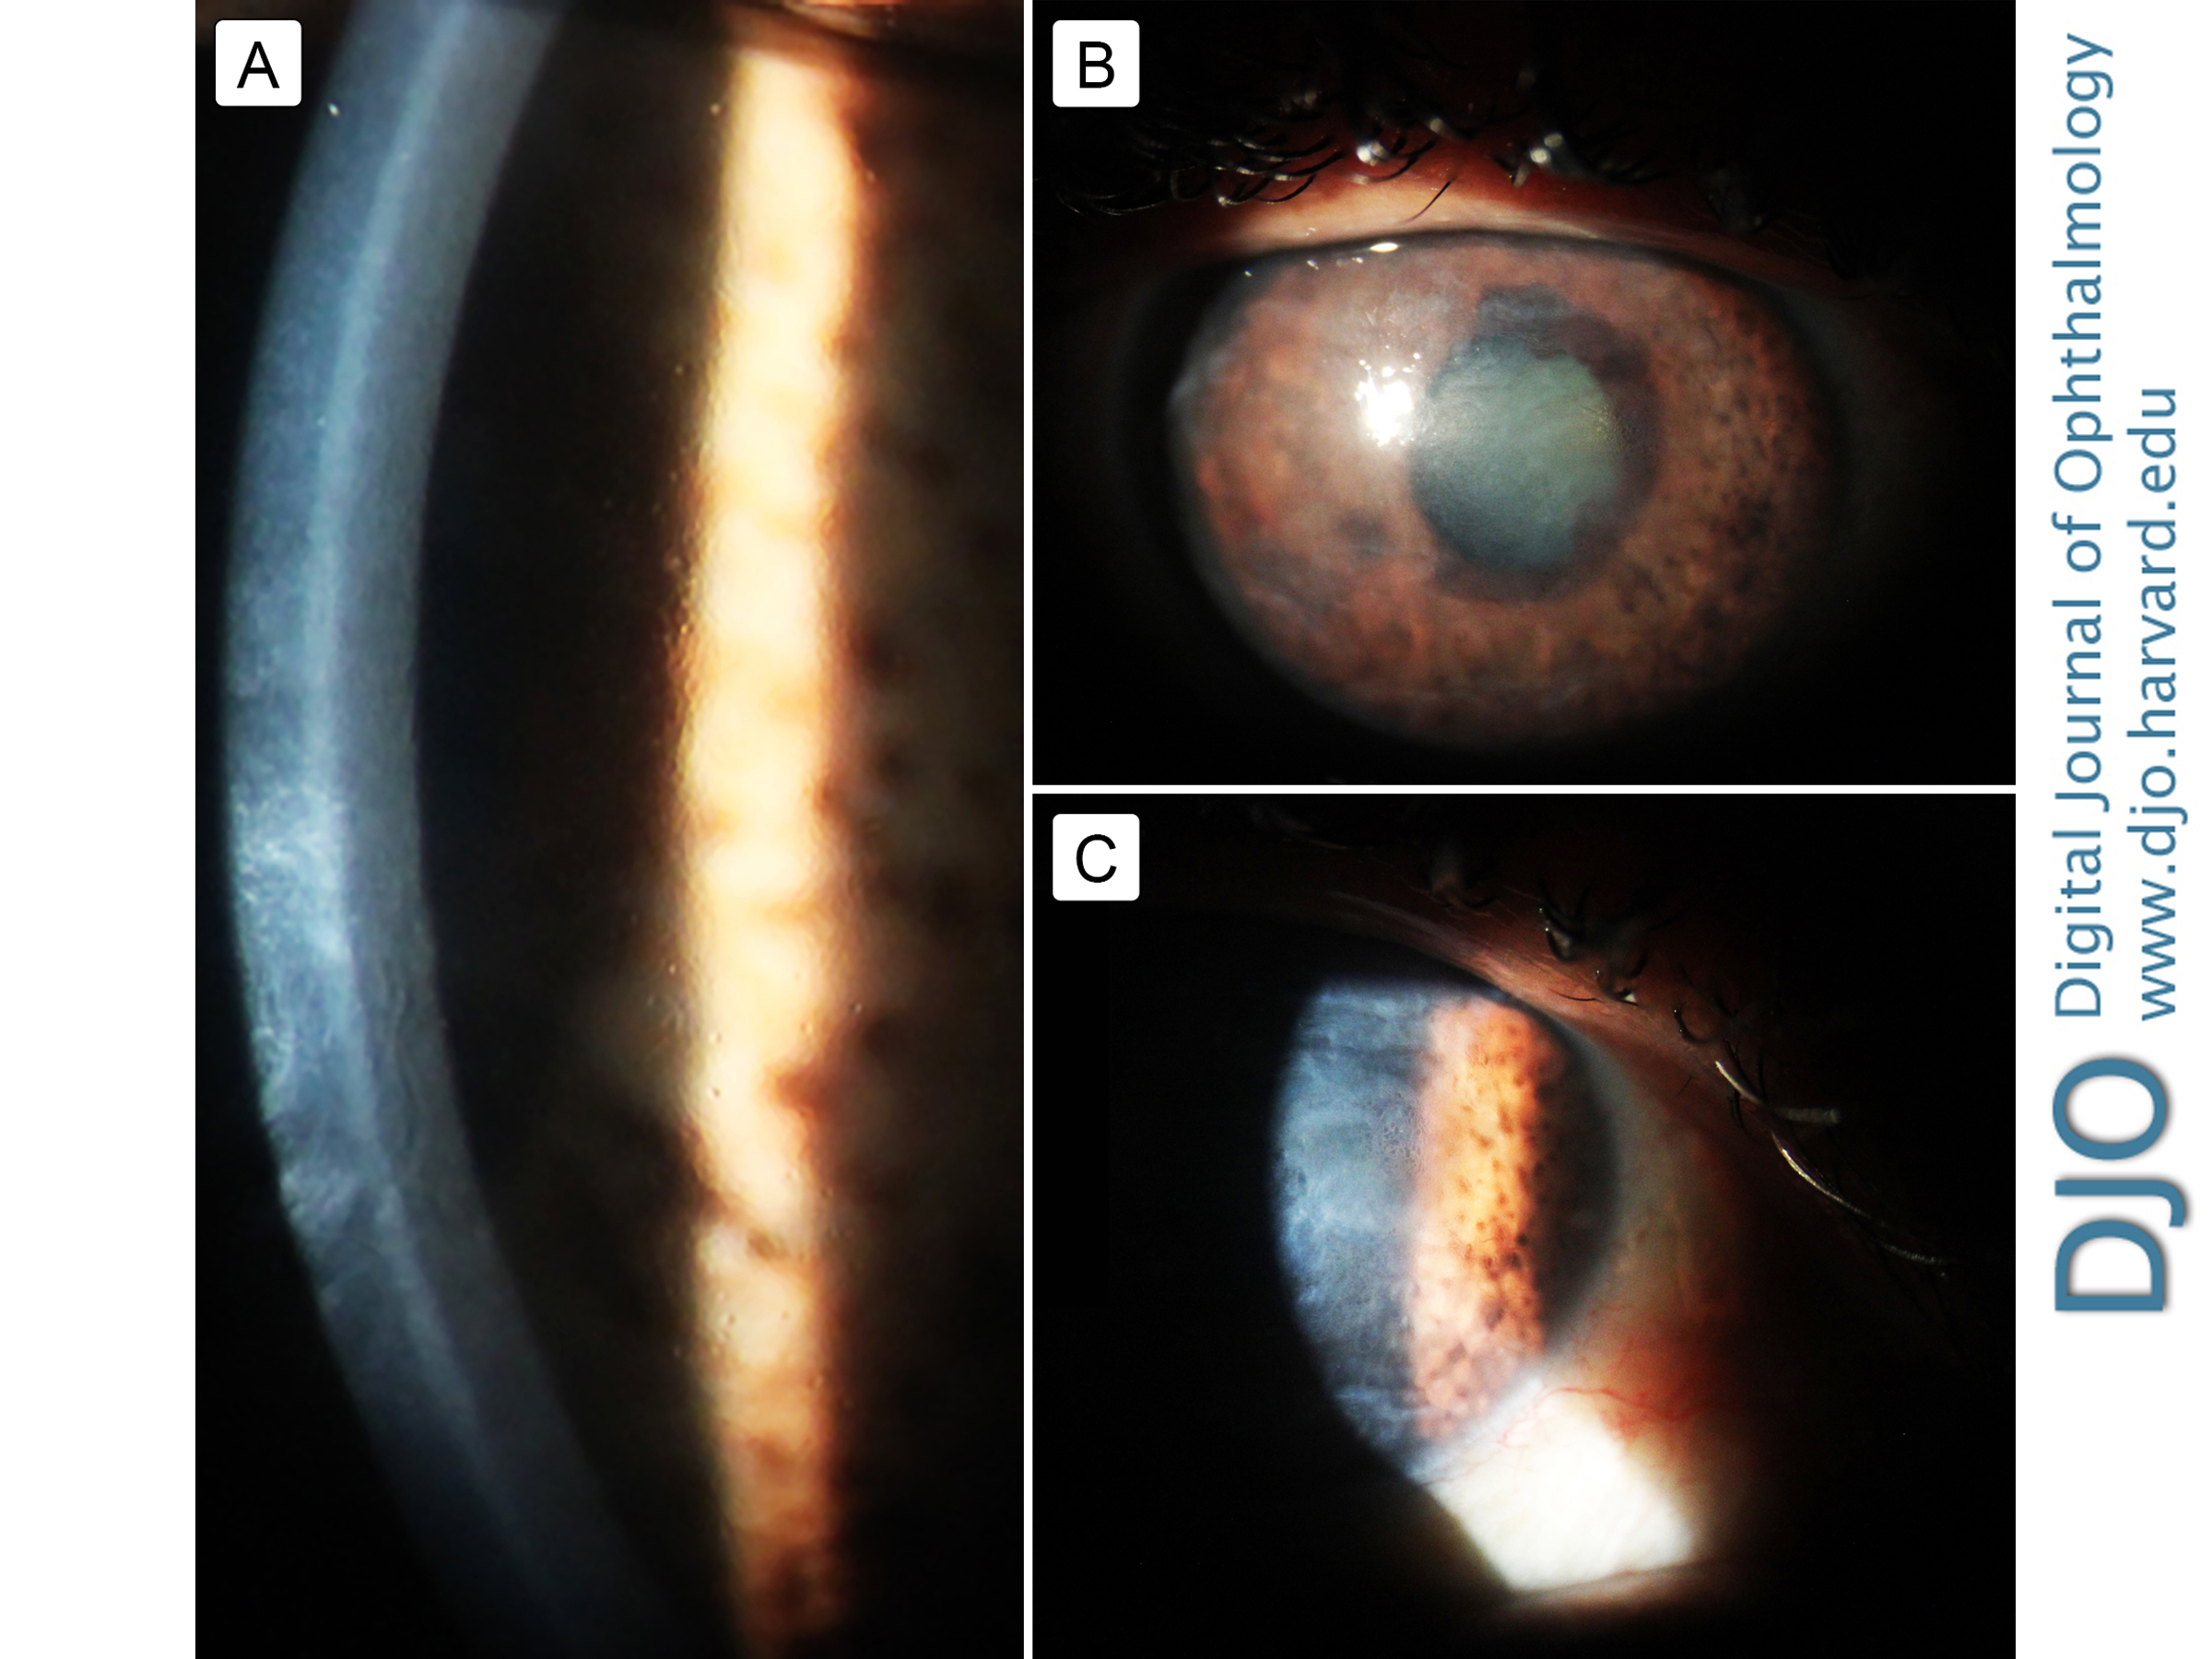 A, Slit-lamp biomicroscopy imaging of the cornea of this patient showing an irregular endothelium and mild stromal edema on presentation. B, The same cornea, 14 months later, with moderate stromal edema that reduces the visibility of iris details. C, Two years after presentation, the cornea shows marked stromal edema, hampering the direct view of the anterior segment.